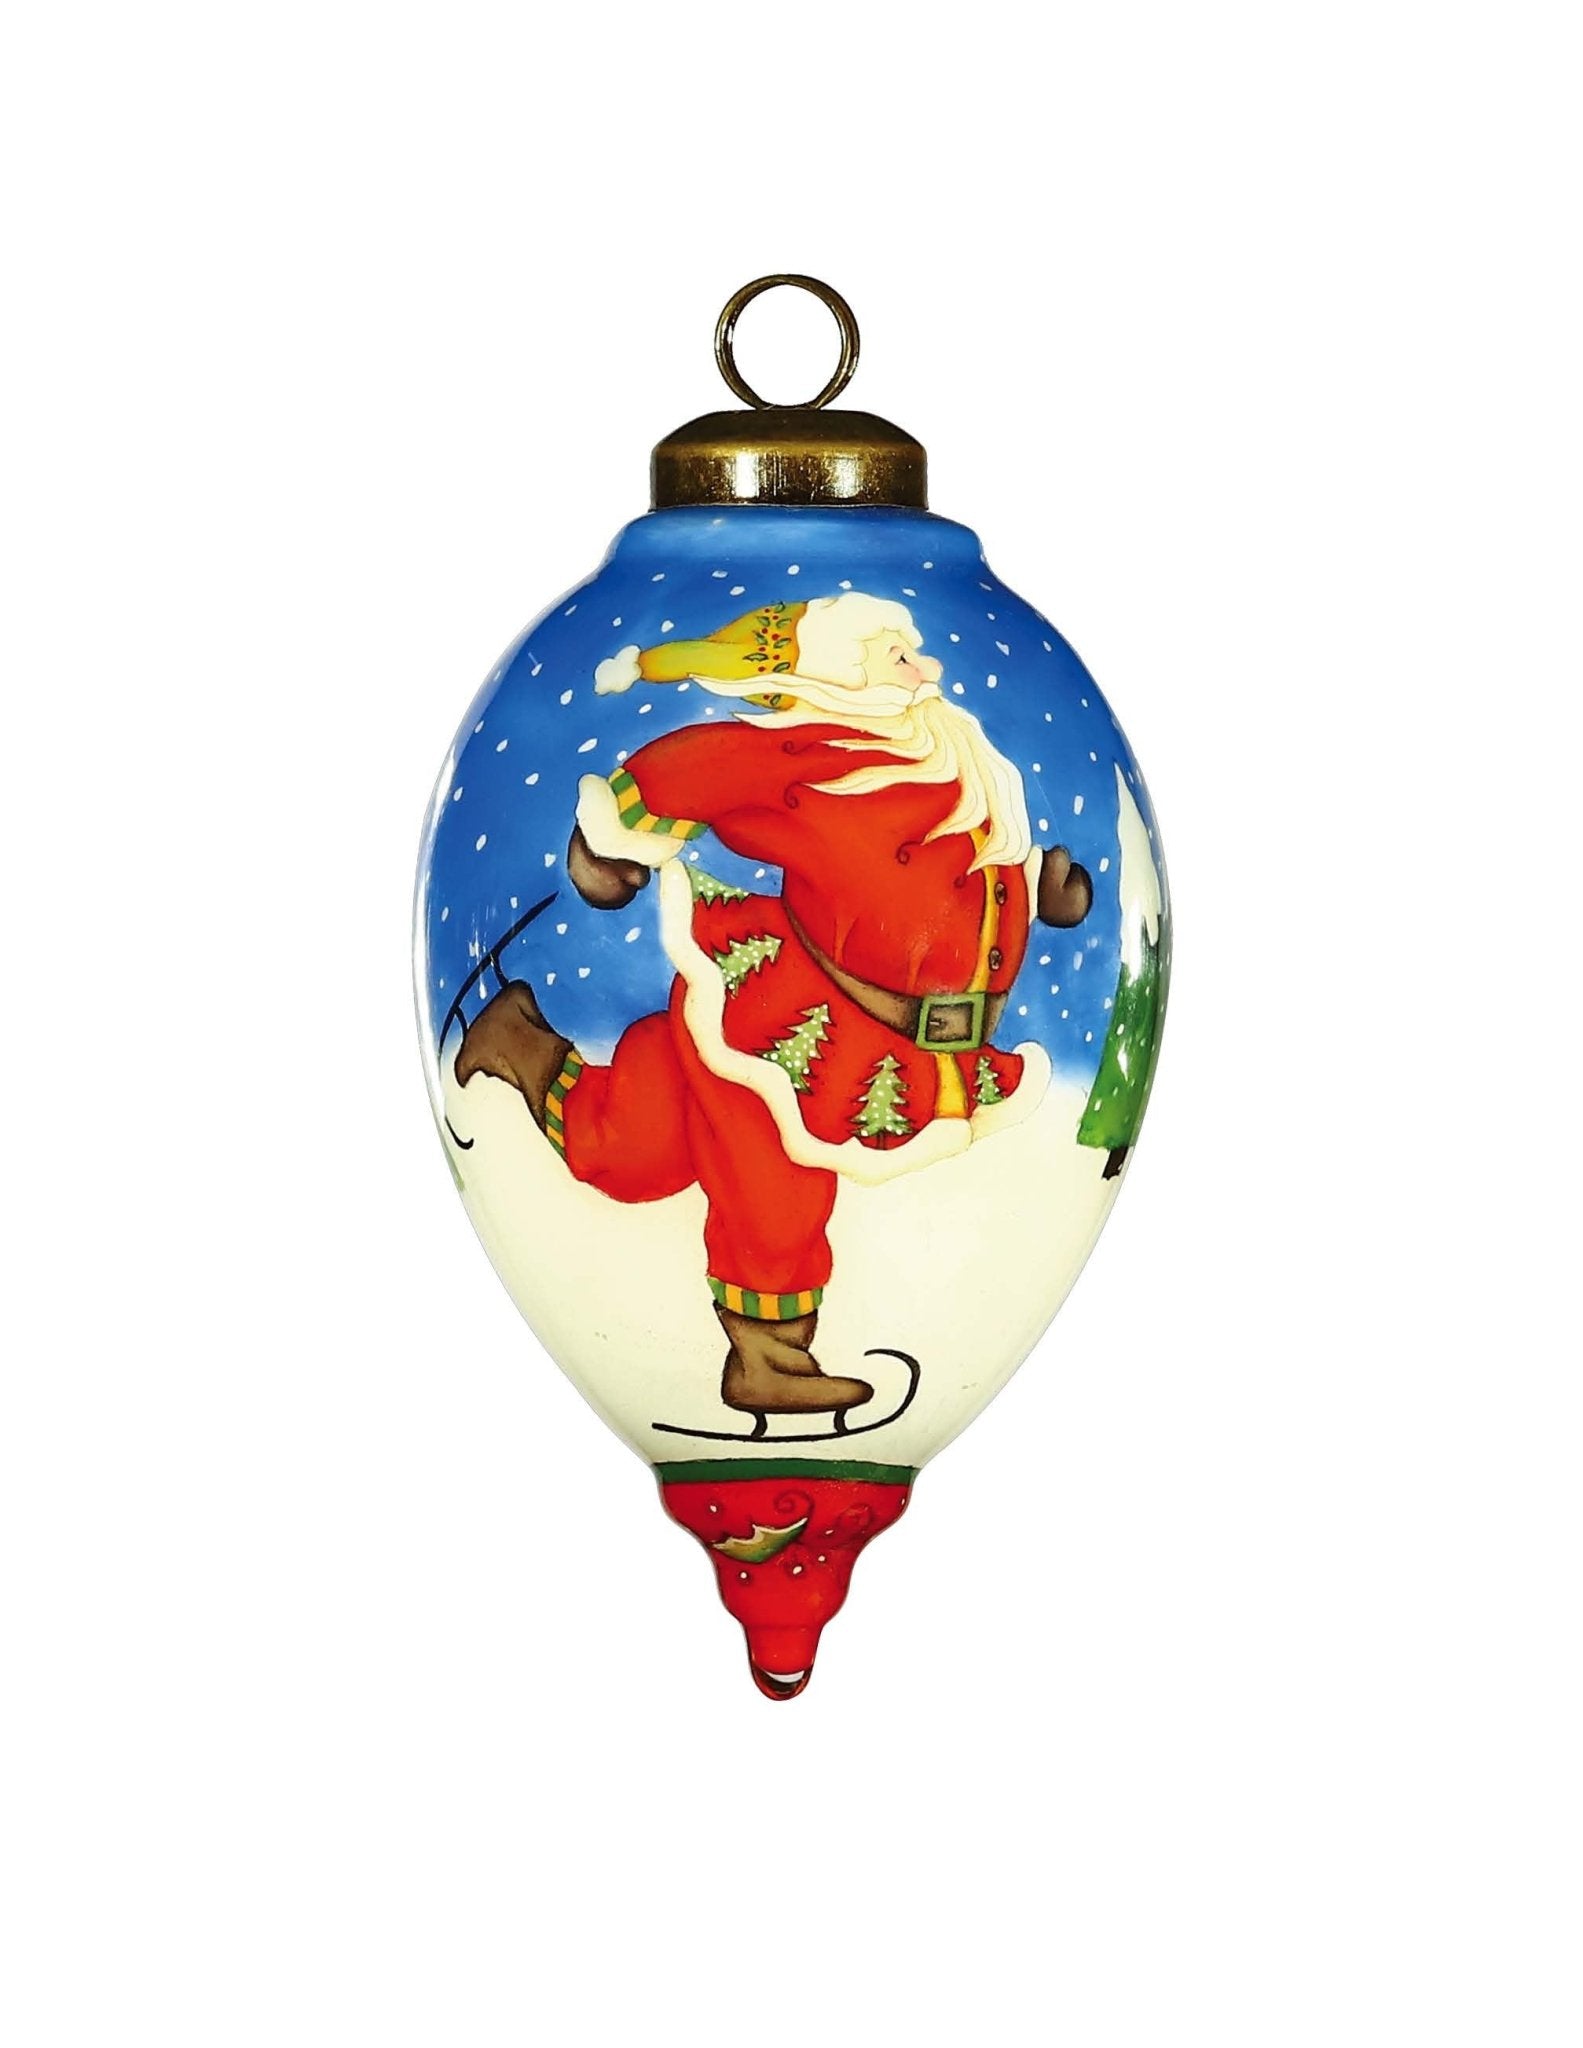 Ice-Skating-Santa-Hand-Painted-Mouth-Blown-Glass-Ornament-Christmas-Ornaments